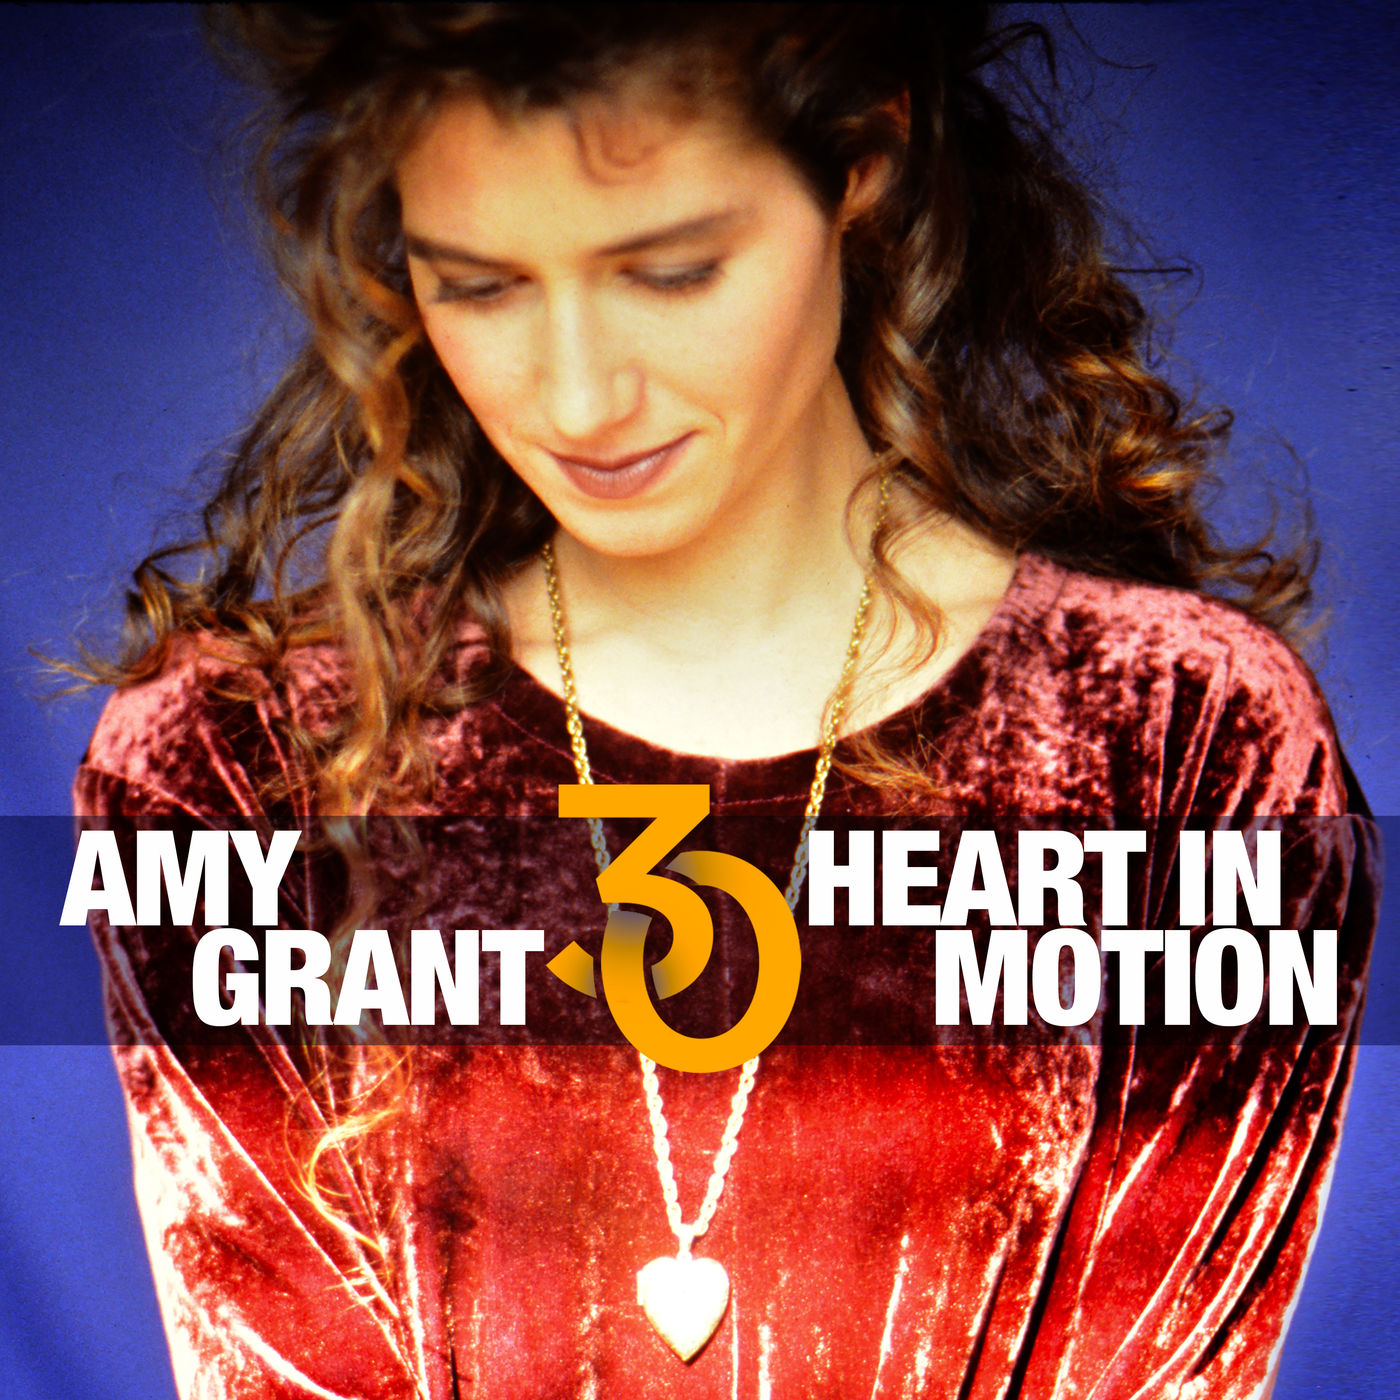 Amy Grant - Heart In Motion (30th Anniversary Edition) (1991/2021) [FLAC 24bit/44,1kHz]